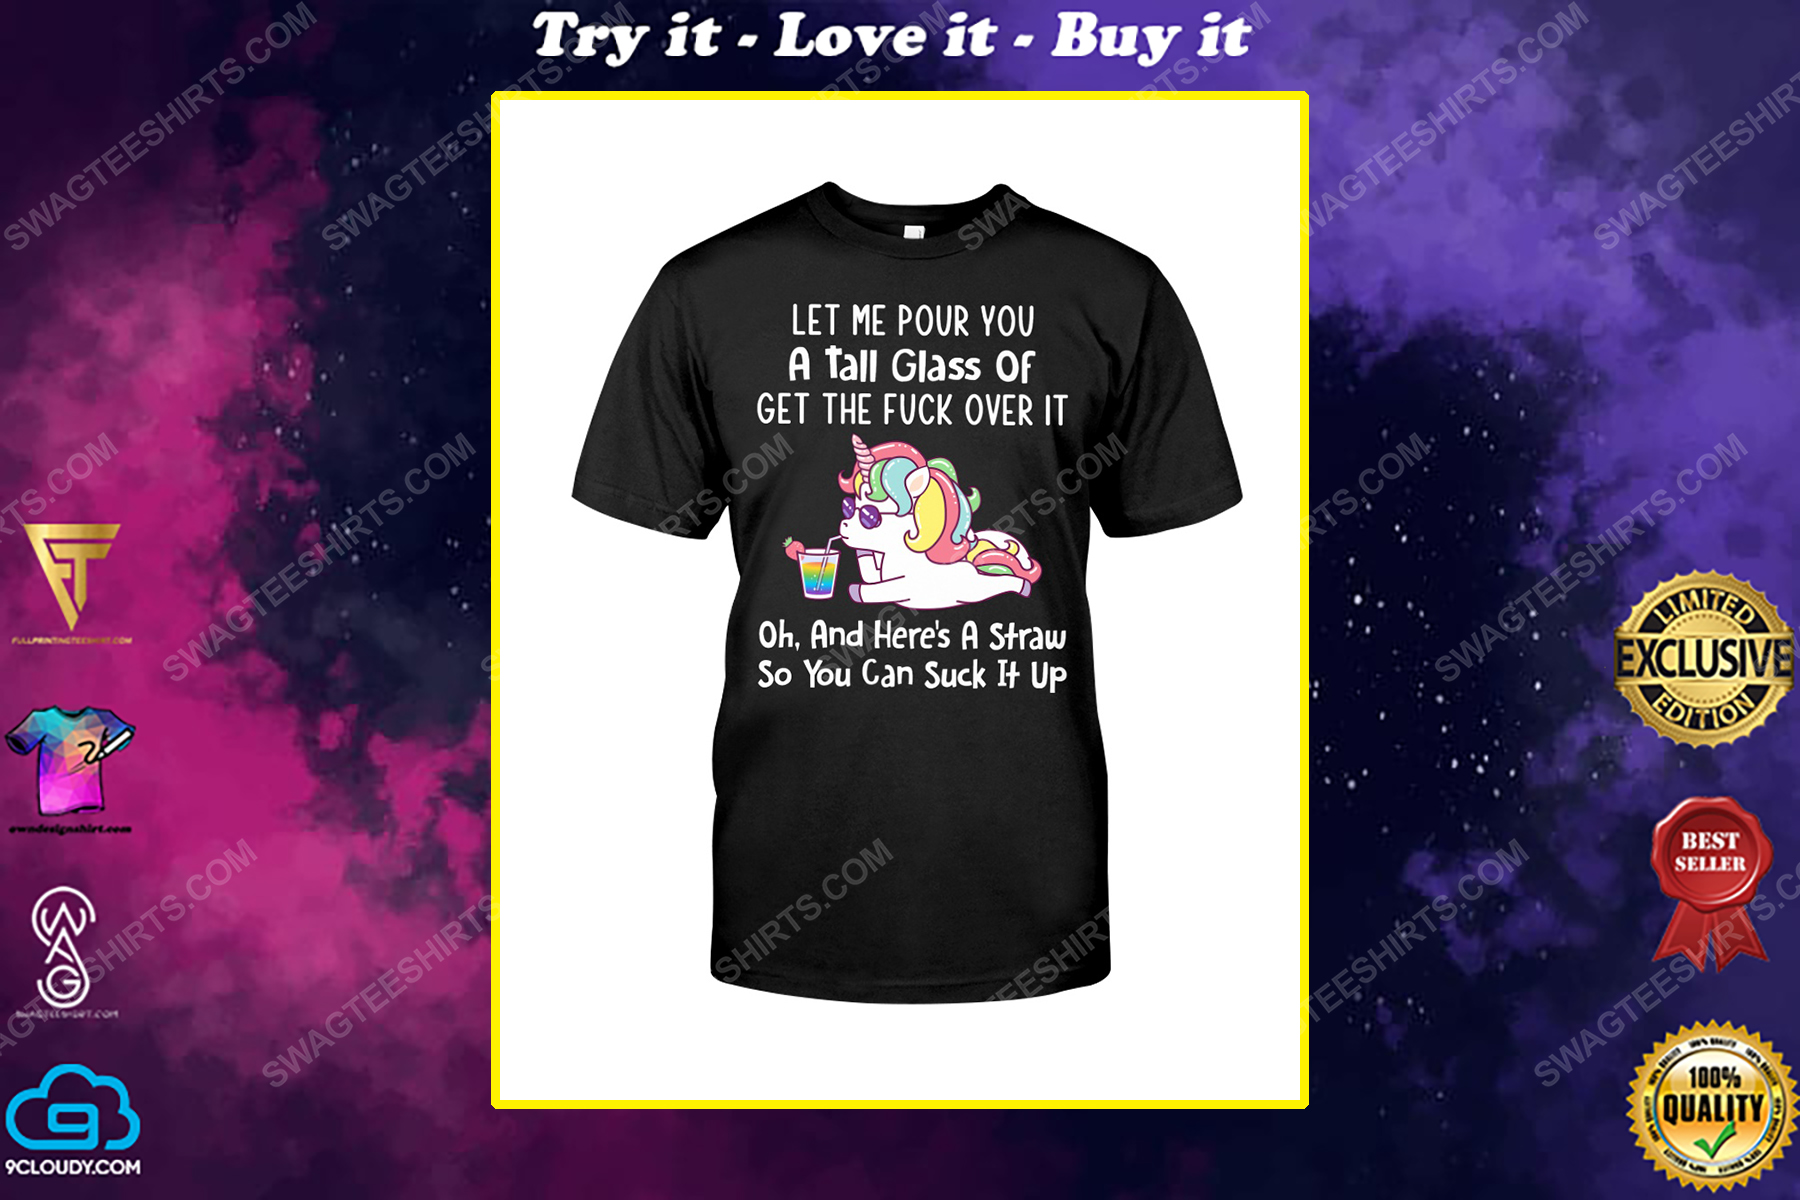 Unicorn let me pour you a tall glass of get over it shirt